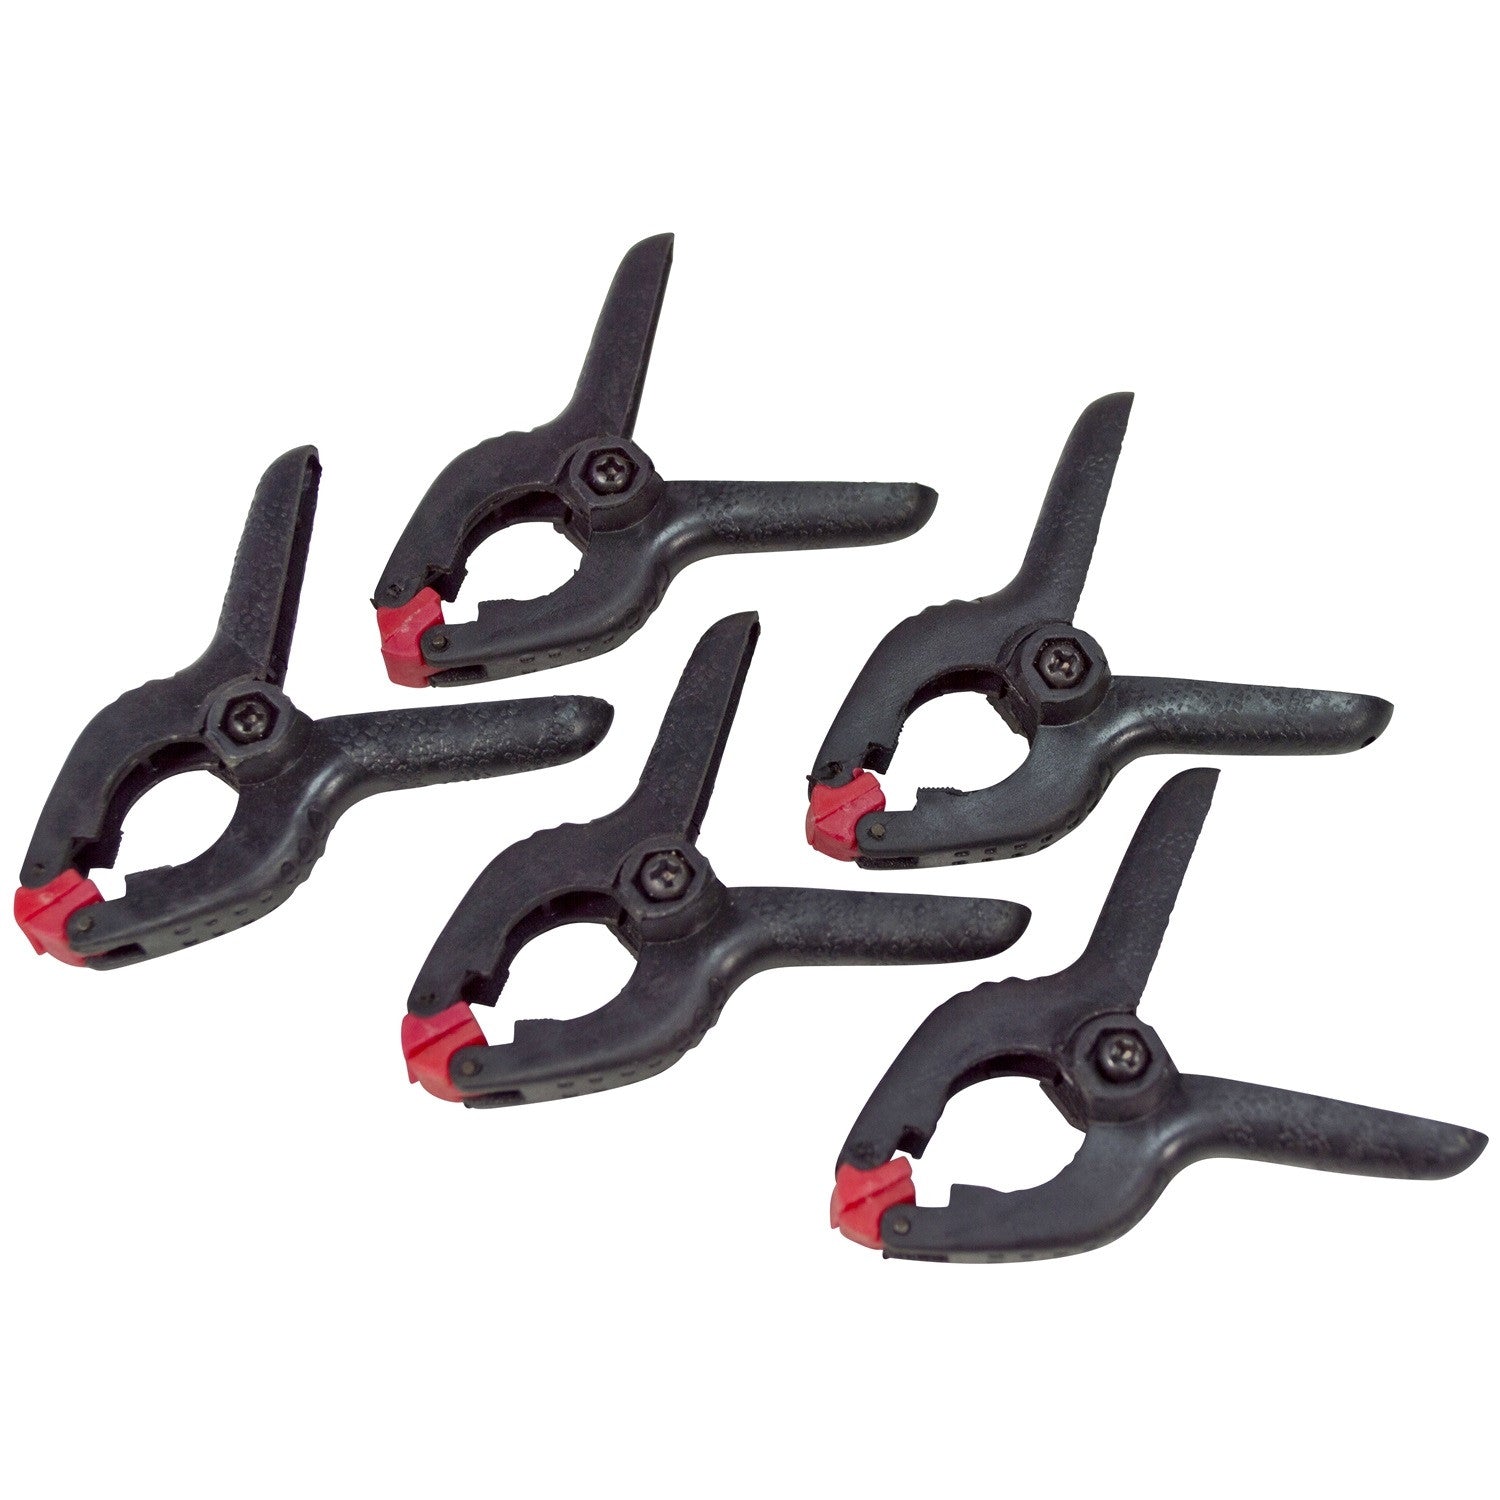 Amtech S2970 Mini Spring Clamp 5Pce Set - Premium Clamps from DK Tools - Just $1.60! Shop now at W Hurst & Son (IW) Ltd